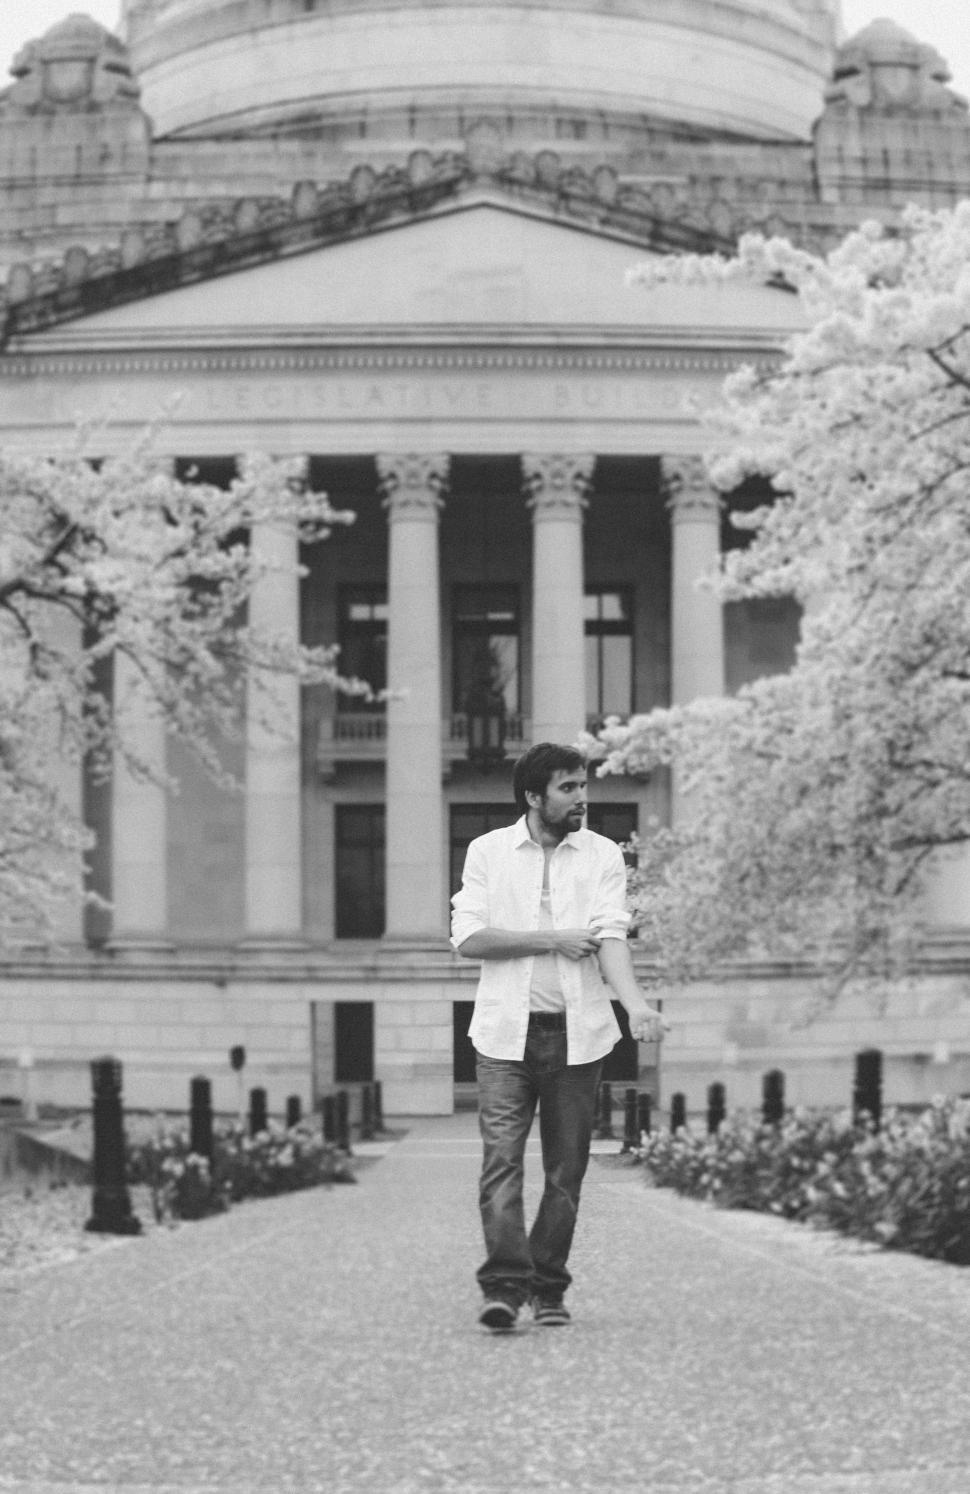 Free Image of Young Man and Washington State Capitol Building With Cherry Blossom - B&W 